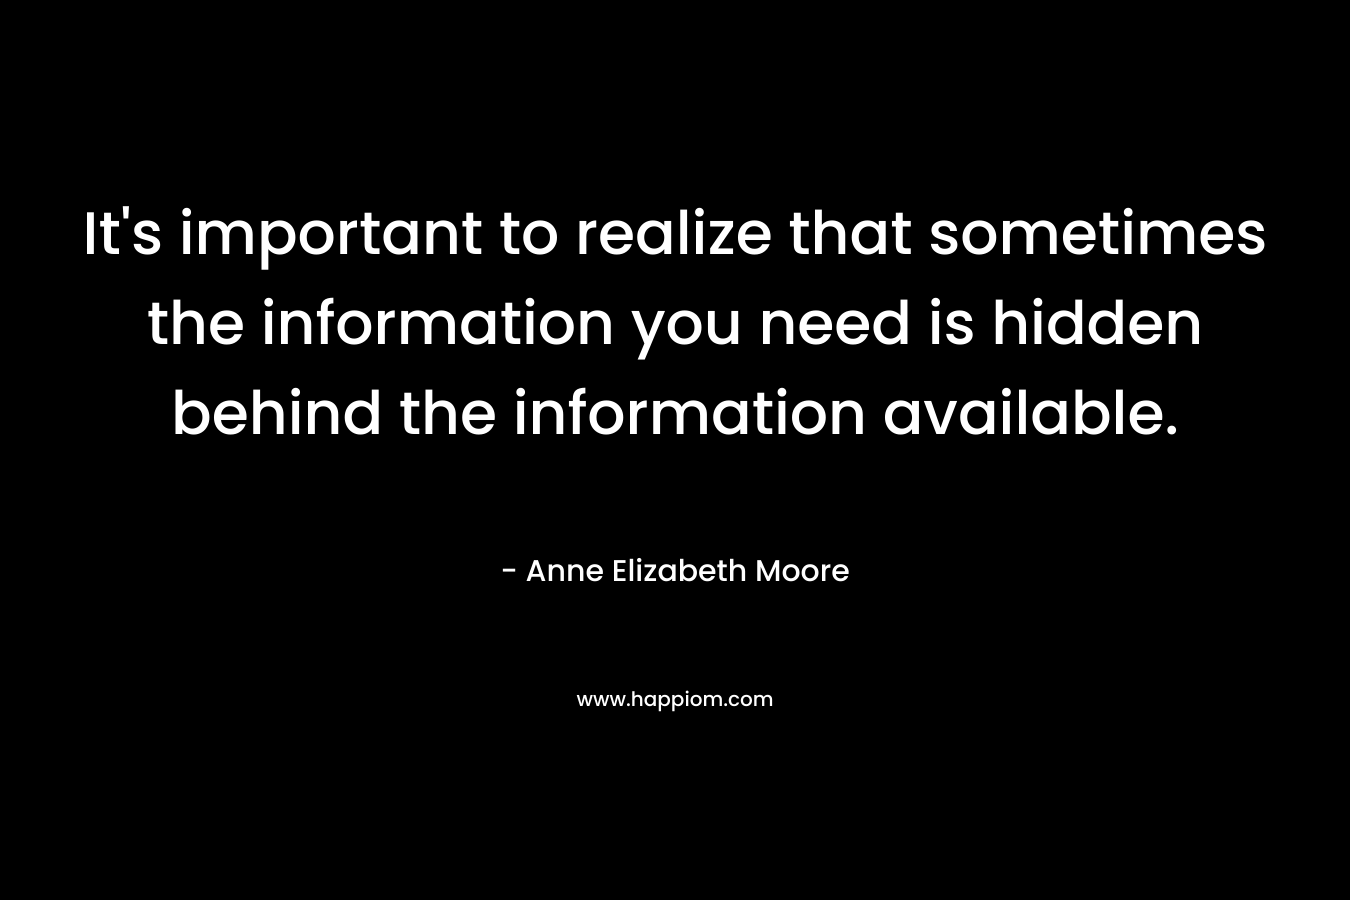 It's important to realize that sometimes the information you need is hidden behind the information available.